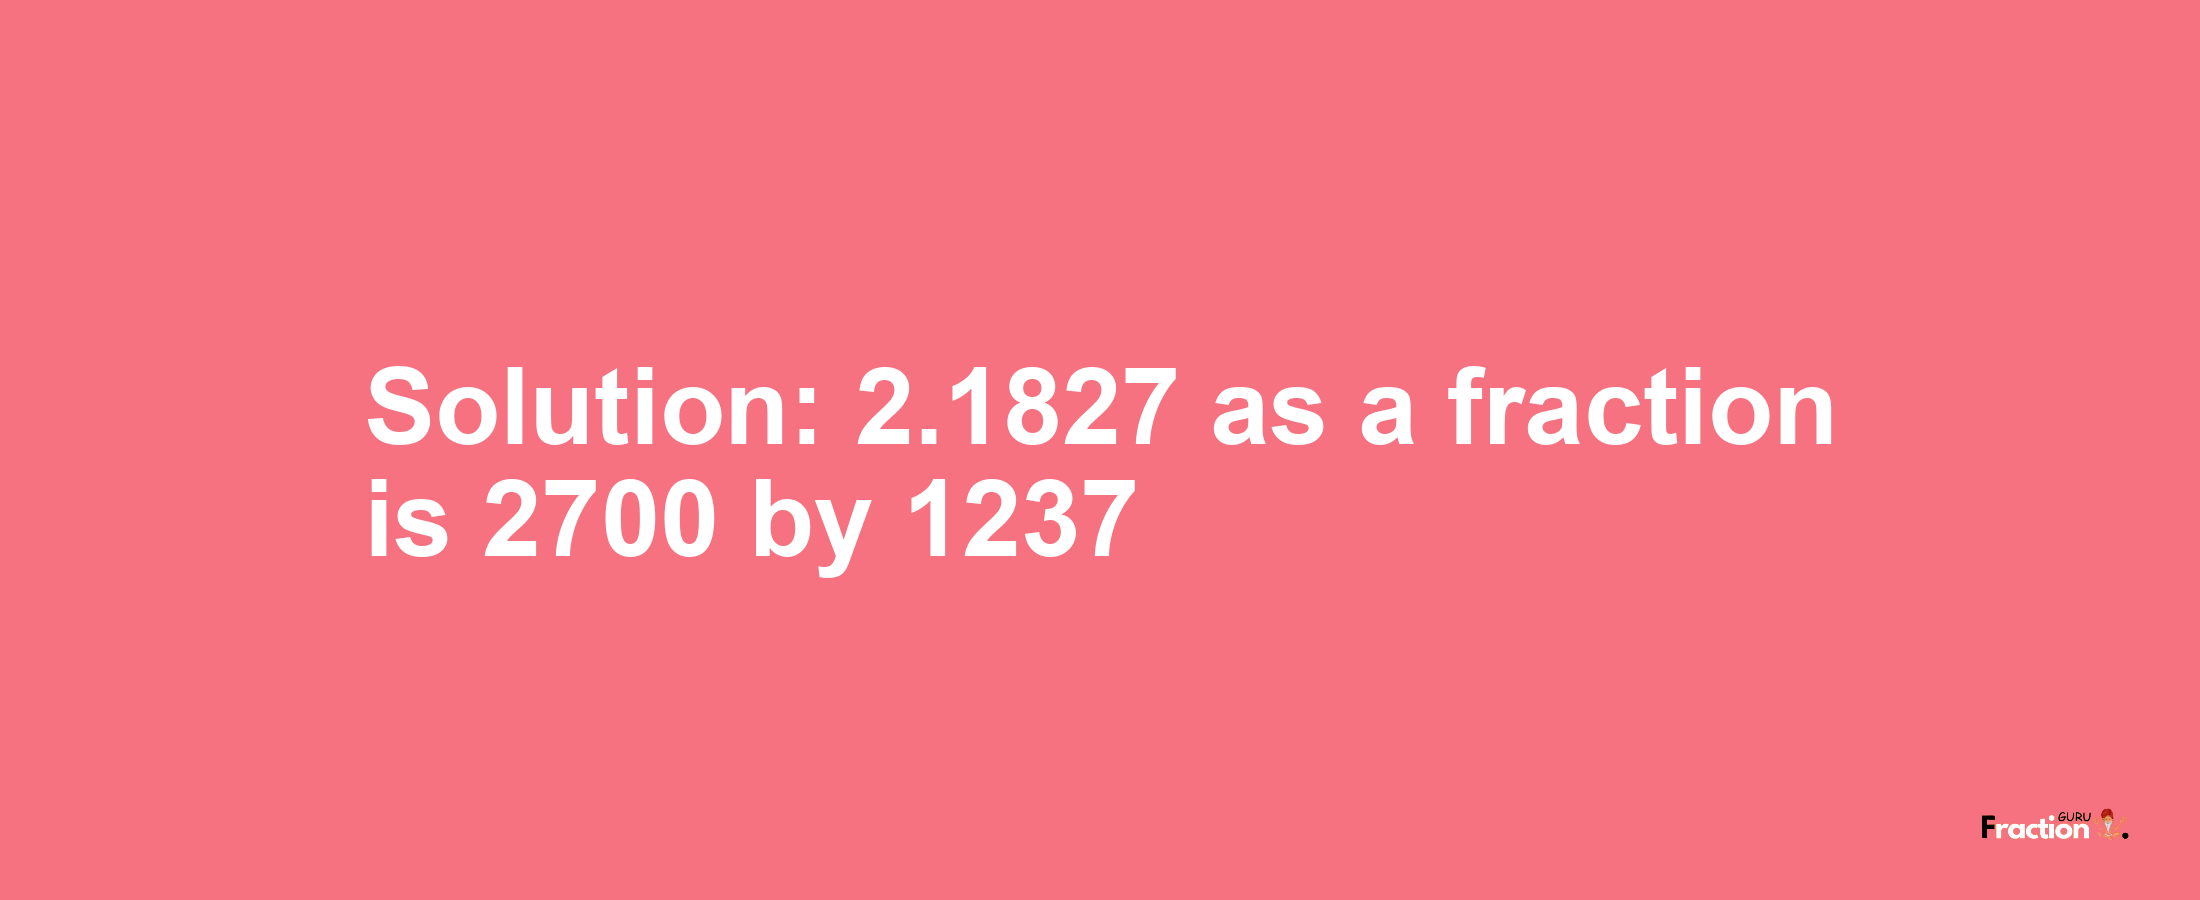 Solution:2.1827 as a fraction is 2700/1237